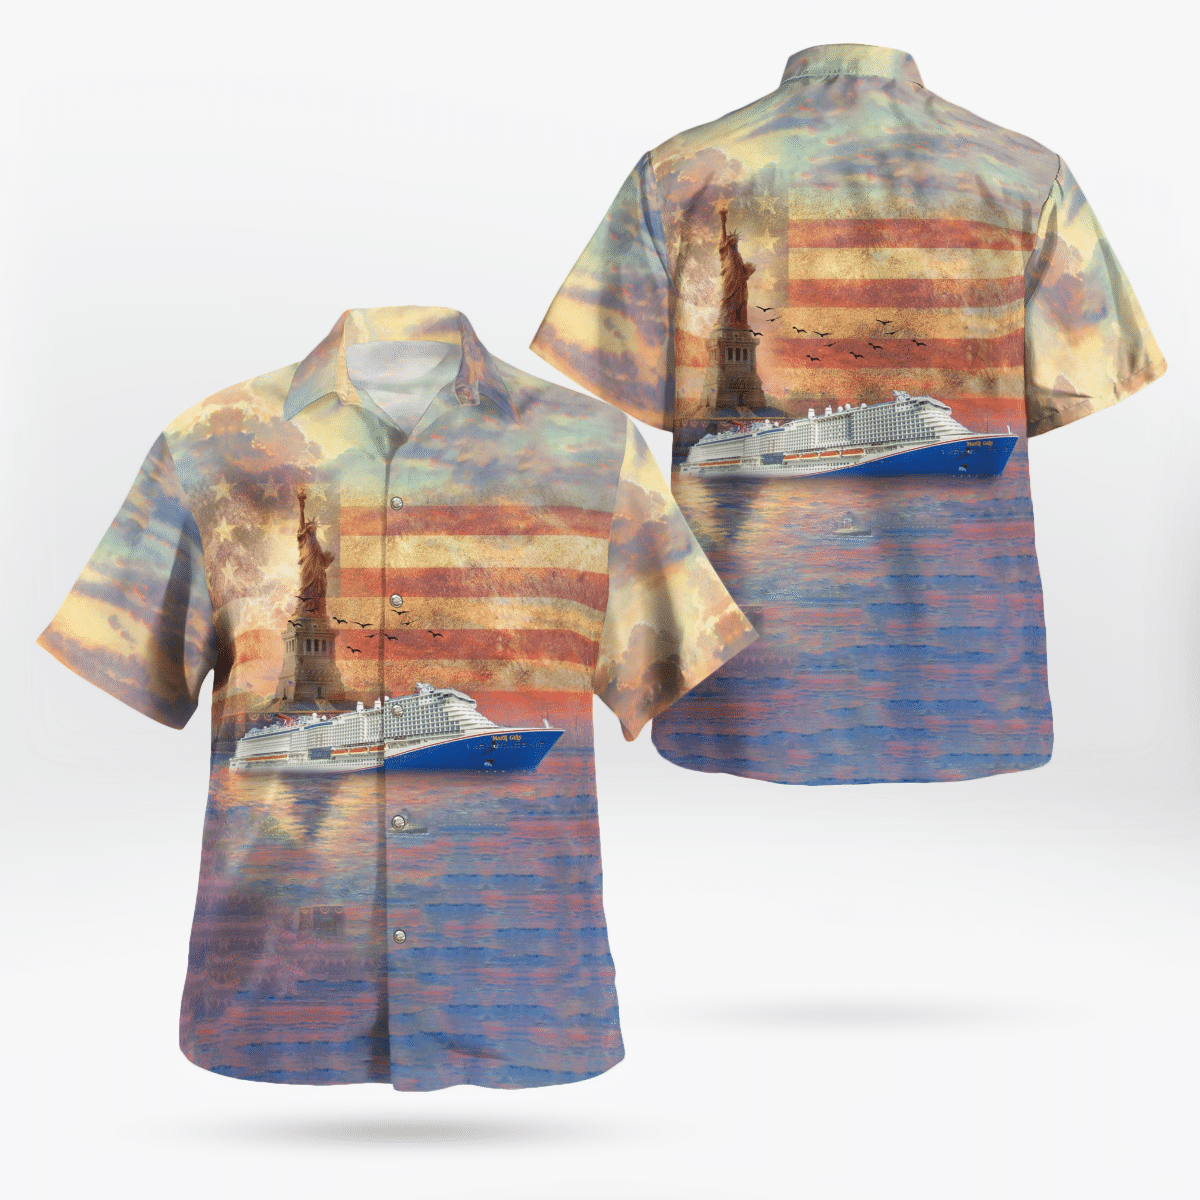 HOT Carnival Cruise Line's Mardi Gras Independence Day Tropical Shirt, Shorts1